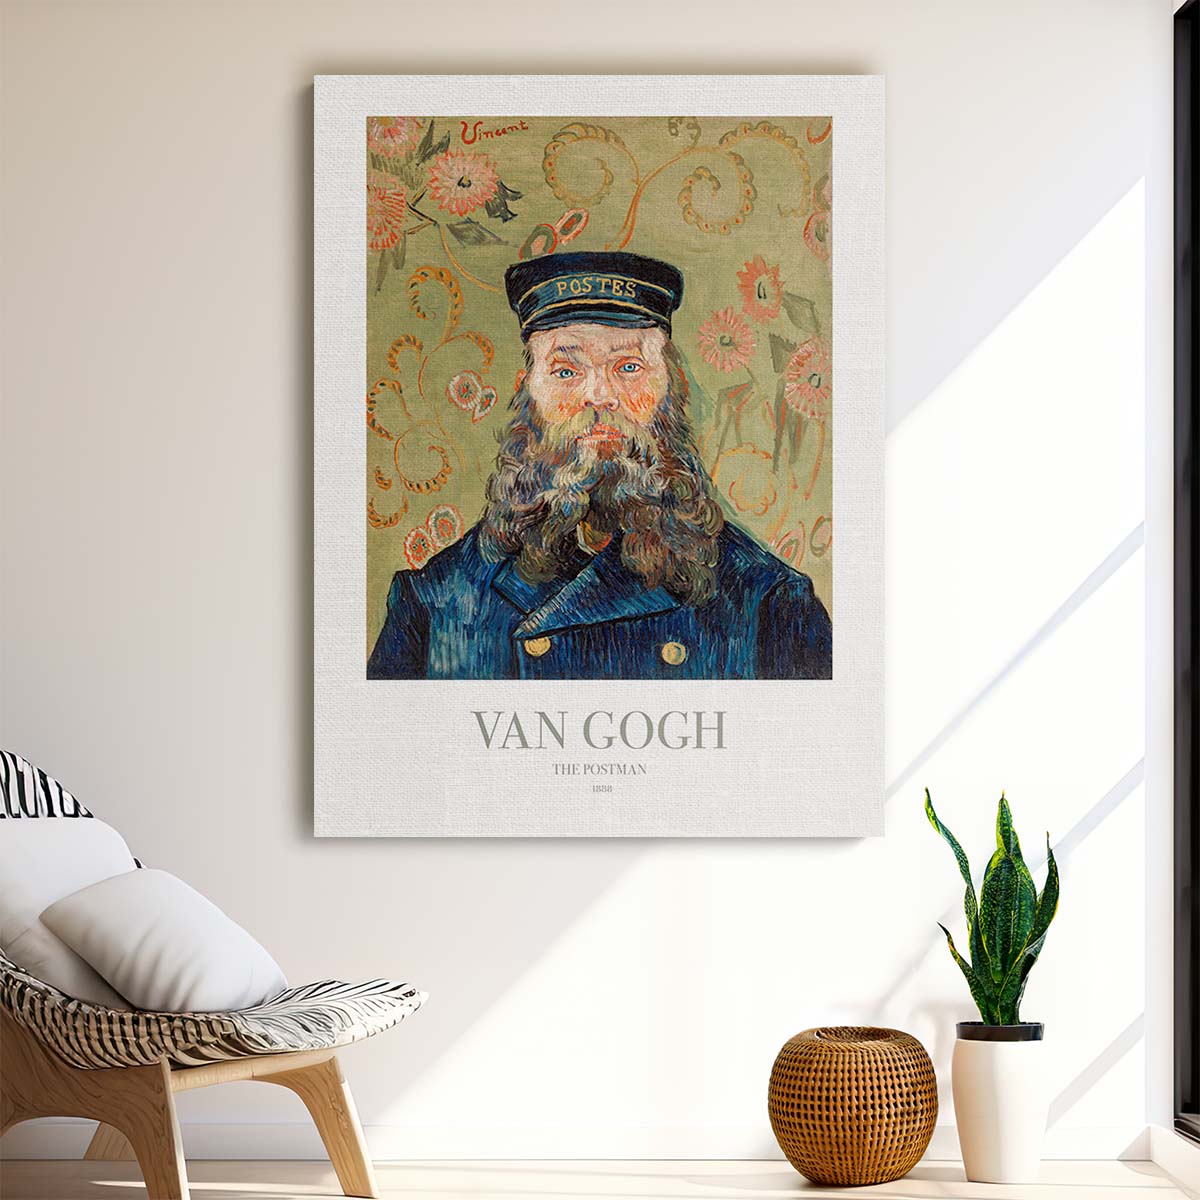 Van Gogh's 'The Postman' Illustrative Acrylic Portrait Painting by Luxuriance Designs, made in USA